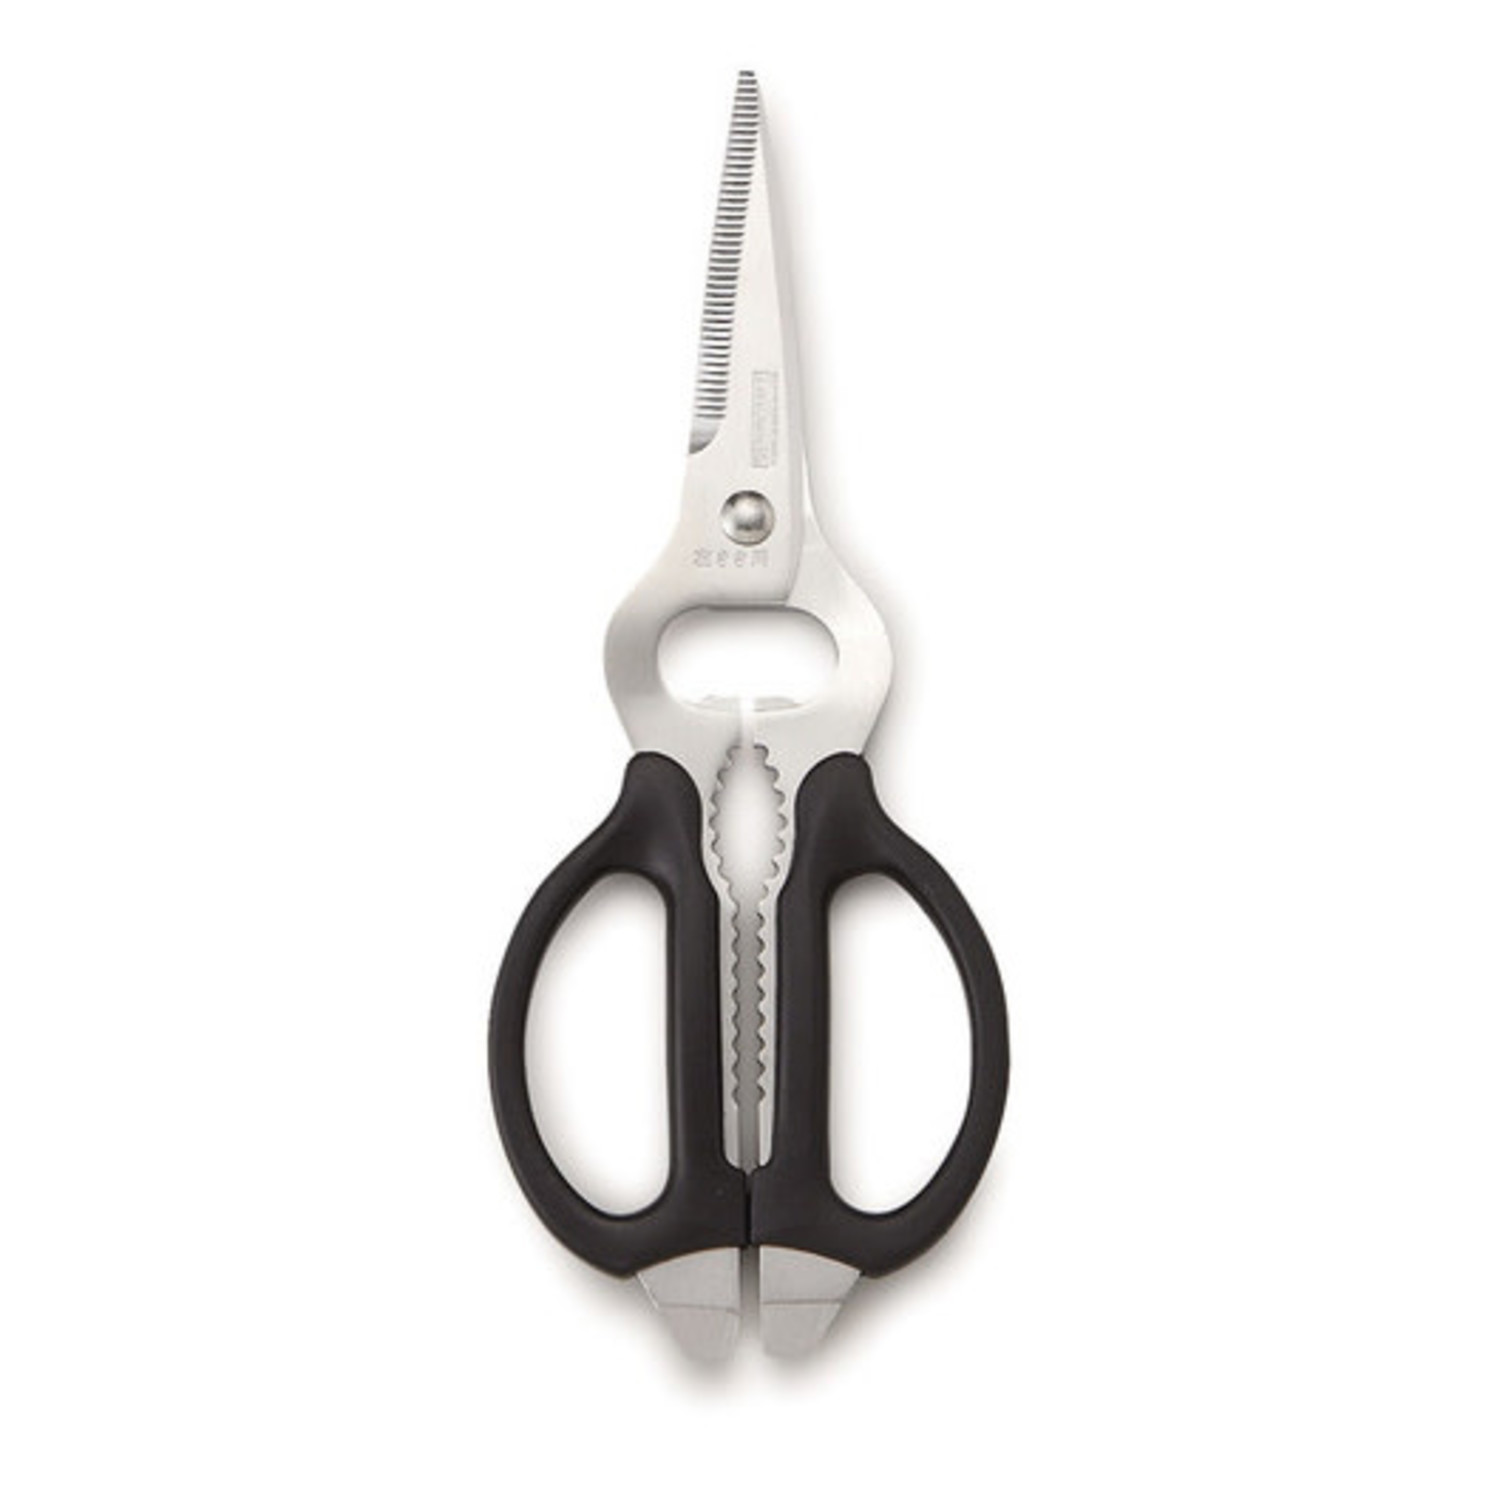 CANARY Left Handed Scissors Adult For Office, All Metal Japanese